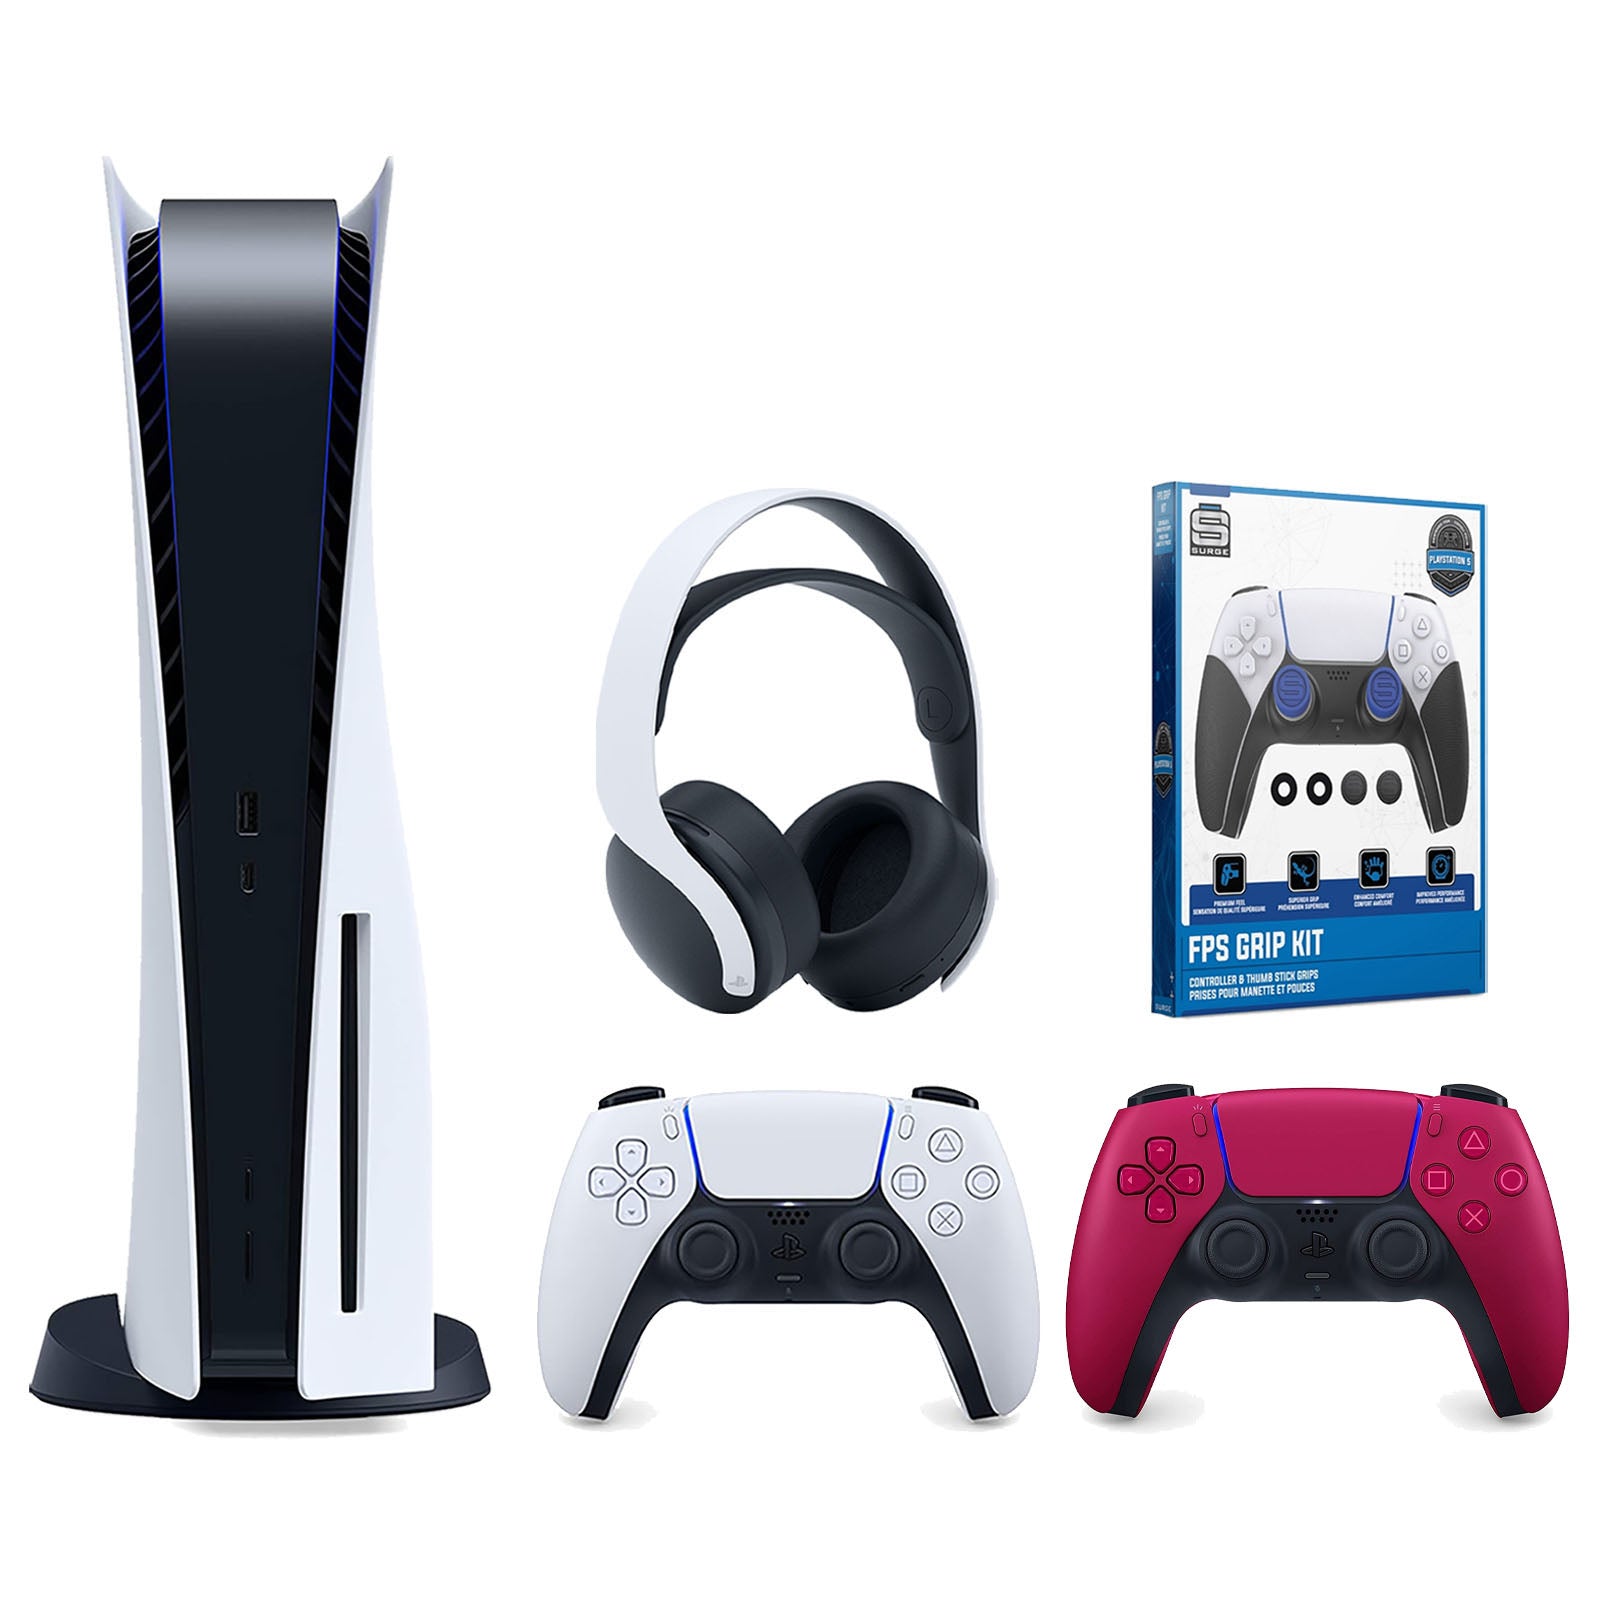 Sony Playstation 5 Disc Version Console with Extra Red Controller, White PULSE 3D Headset and Surge FPS Grip Kit With Precision Aiming Rings Bundle - Pro-Distributing